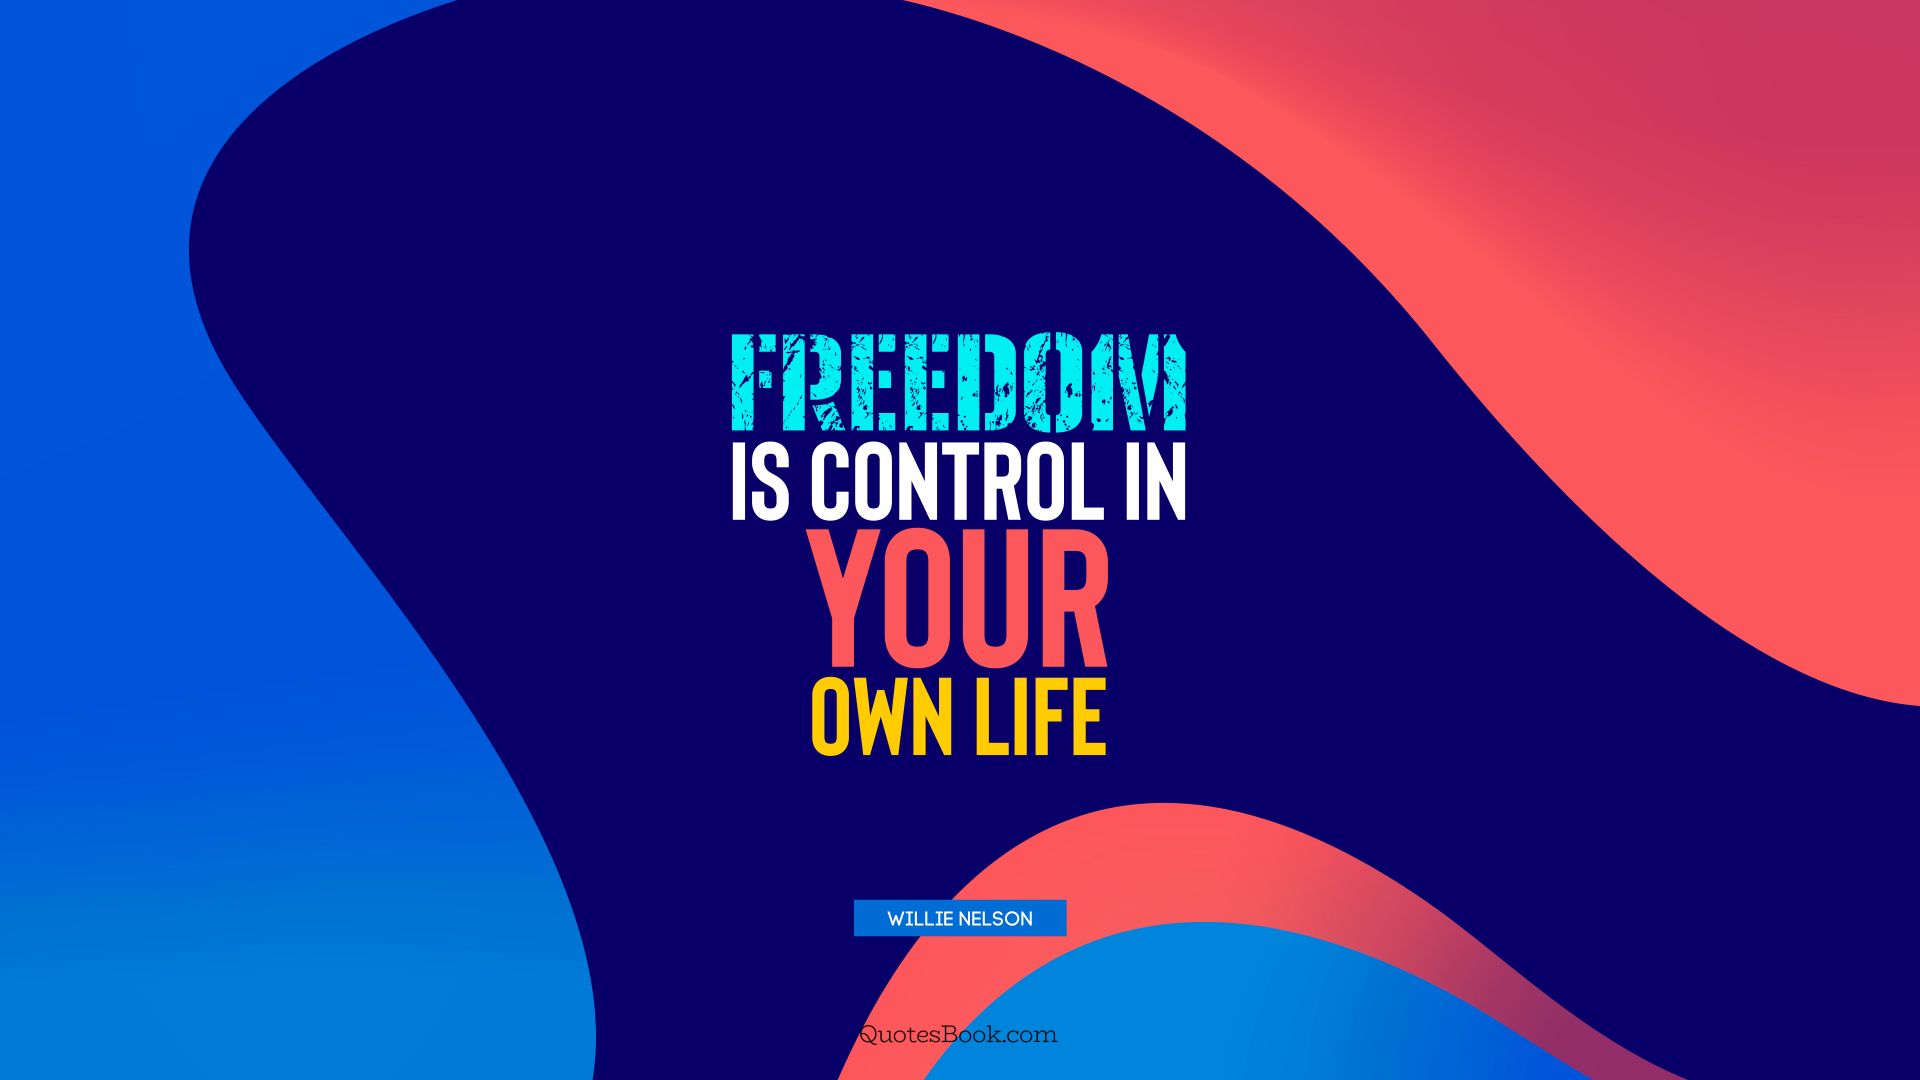 Freedom is control in your own life. - Quote by Willie Nelson